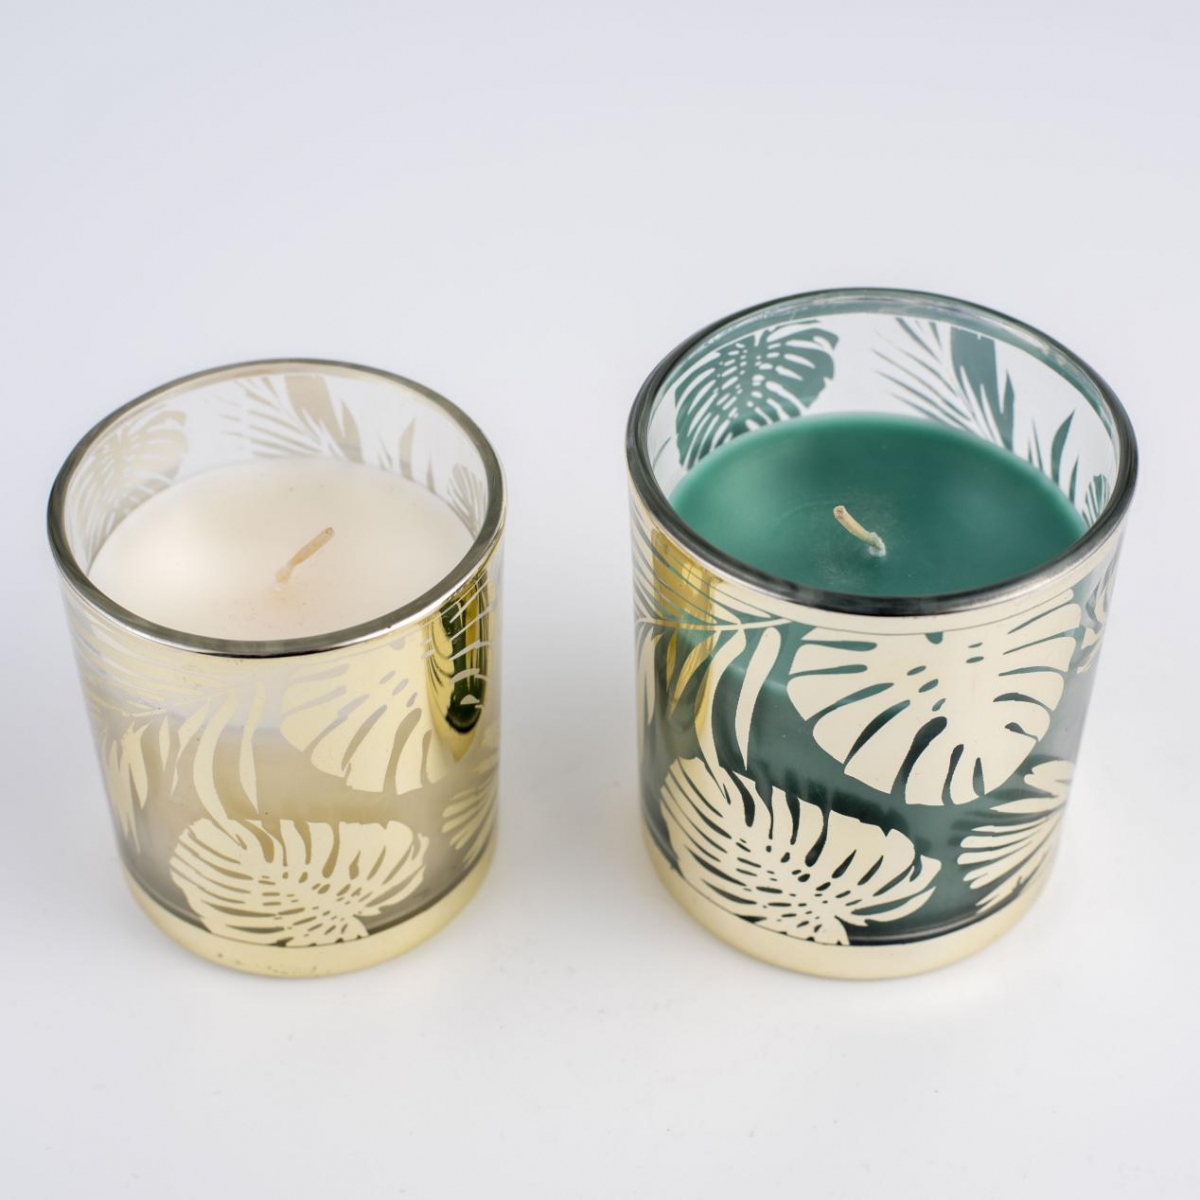 Aromaterapy Candles : Natural Forest Fragrance ,Vegan Candles ,Laser Engraved Glass ,Monstera ,China Factory ,Cheap Price-HOWCANDLE-Candles,Scented Candles,Aromatherapy Candles,Soy Candles,Vegan Candles,Jar Candles,Pillar Candles,Candle Gift Sets,Essential Oils,Reed Diffuser,Candle Holder,